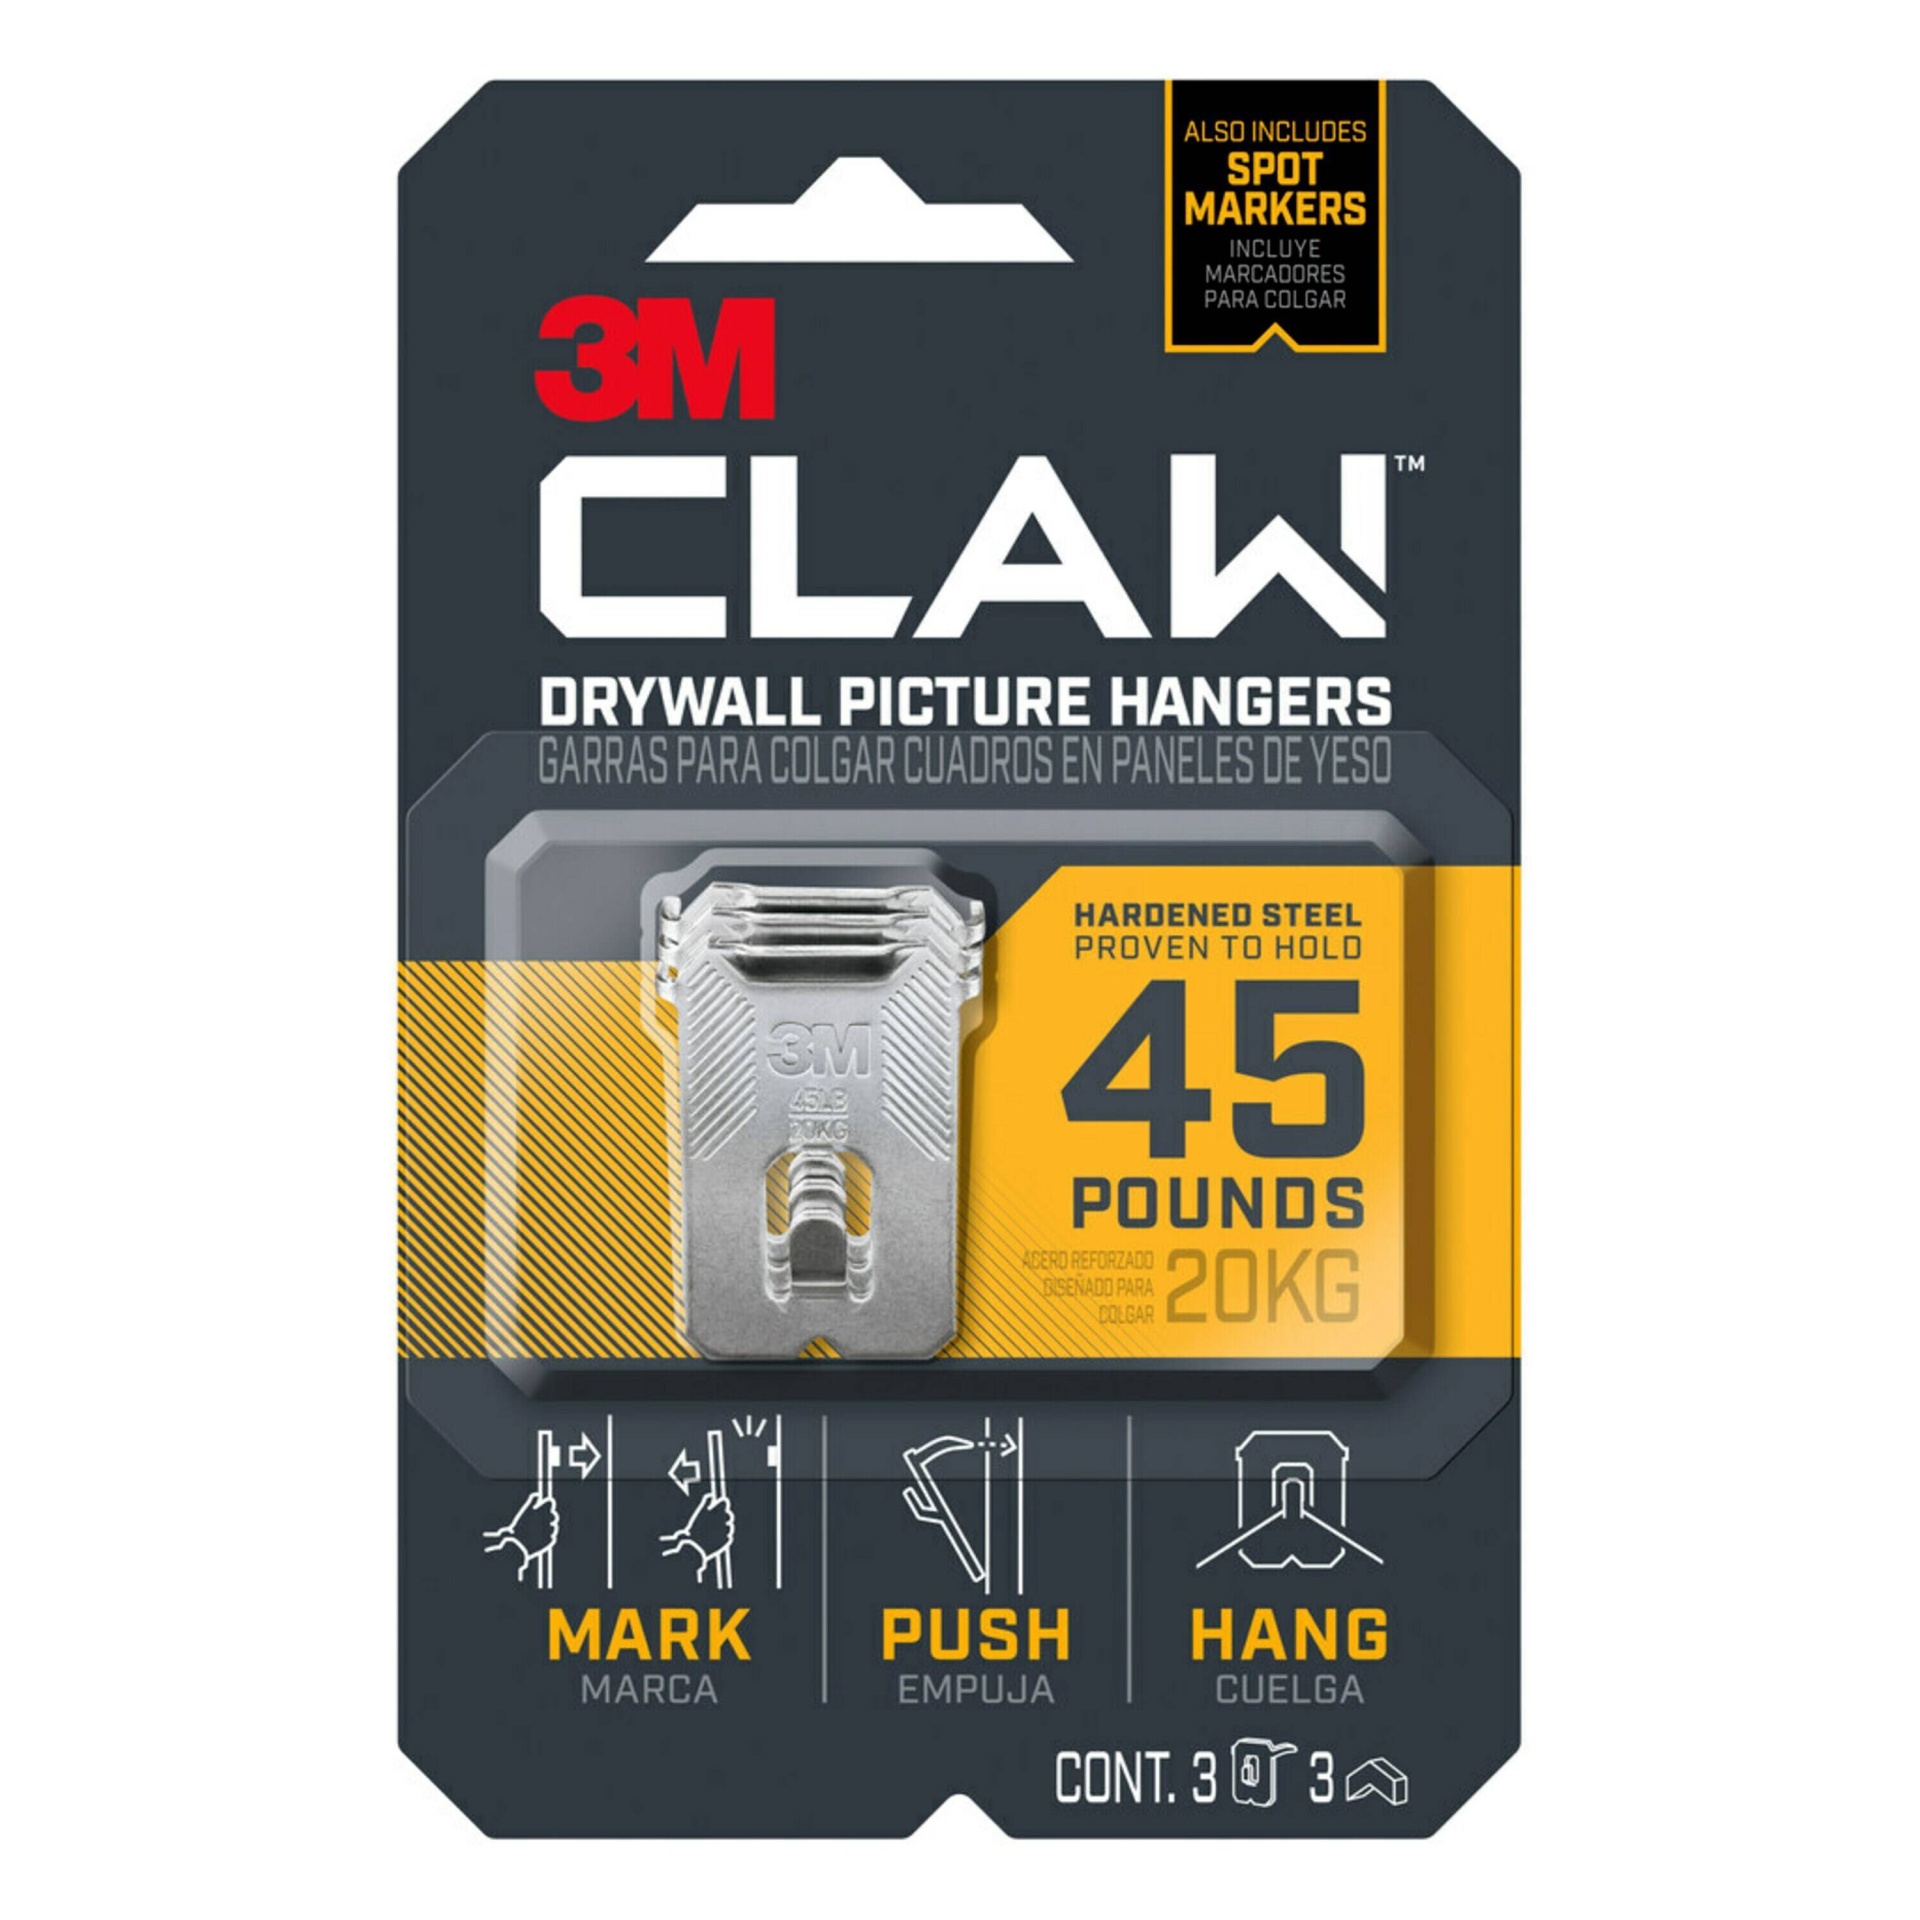 slide 1 of 10, 3M Company 3M CLAW Drywall Picture Hanger 45 lb with Temporary Spot Marker + 3 Hangers and 3 Markers, 45 lb